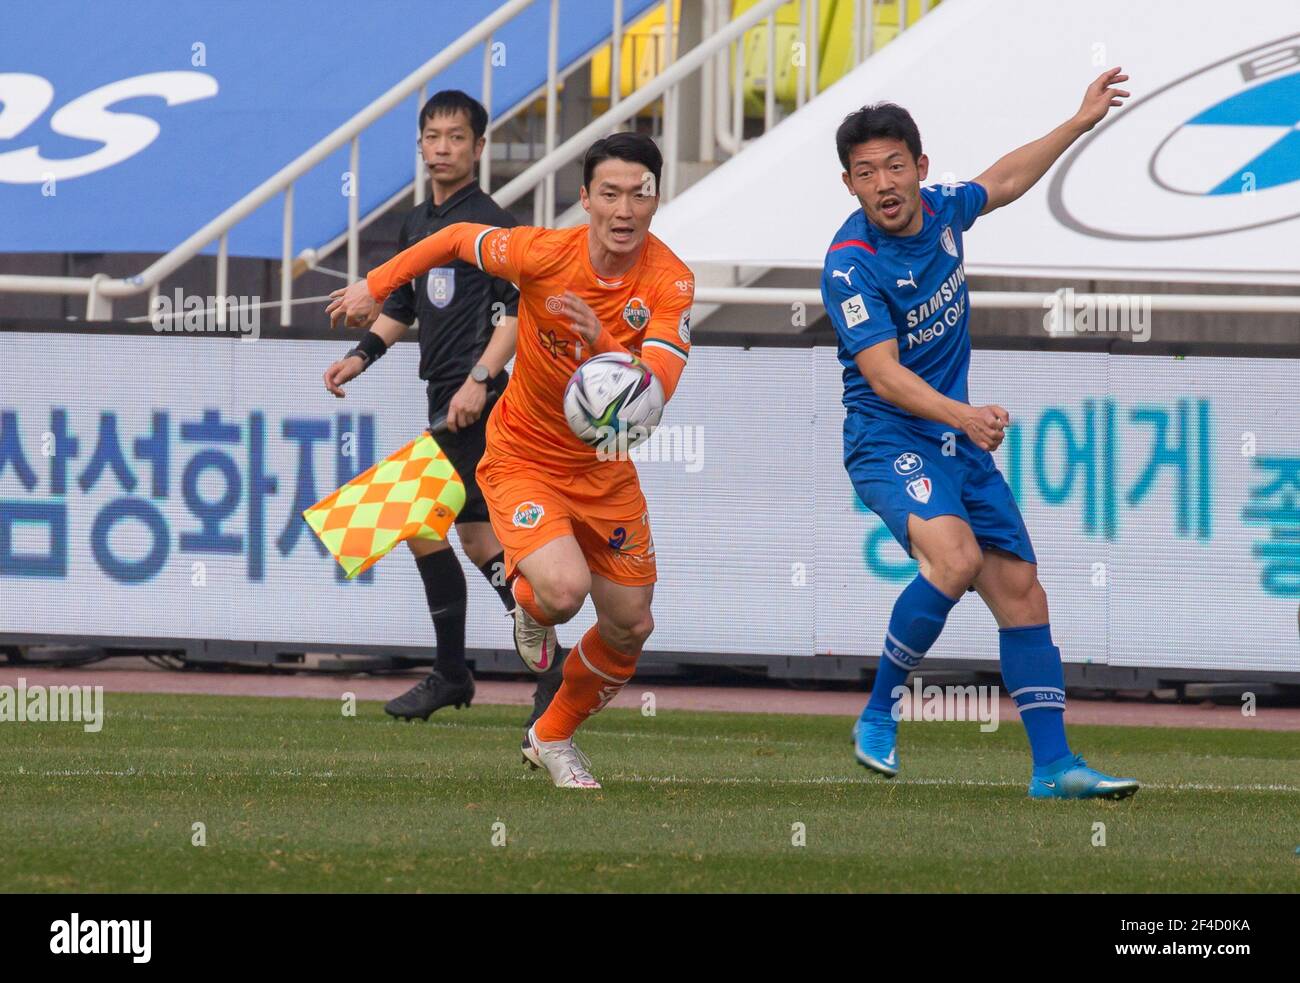 Suwon, South Korea. 14th Mar, 2021. Kim Soo-Beom of Gangwon FC and Lee Ki-Je of Suwon Samsung Bluewings in action during the 4th round of the 2021 K League 1 soccer match between Suwon Samsung Bluewings and Gangwon FC at the Suwon World Cup Stadium.Final score; Suwon Samsung Bluewings 1:1 Gangwon FC. (Photo by Jaewon Lee/SOPA Images/Sipa USA) Credit: Sipa USA/Alamy Live News Stock Photo